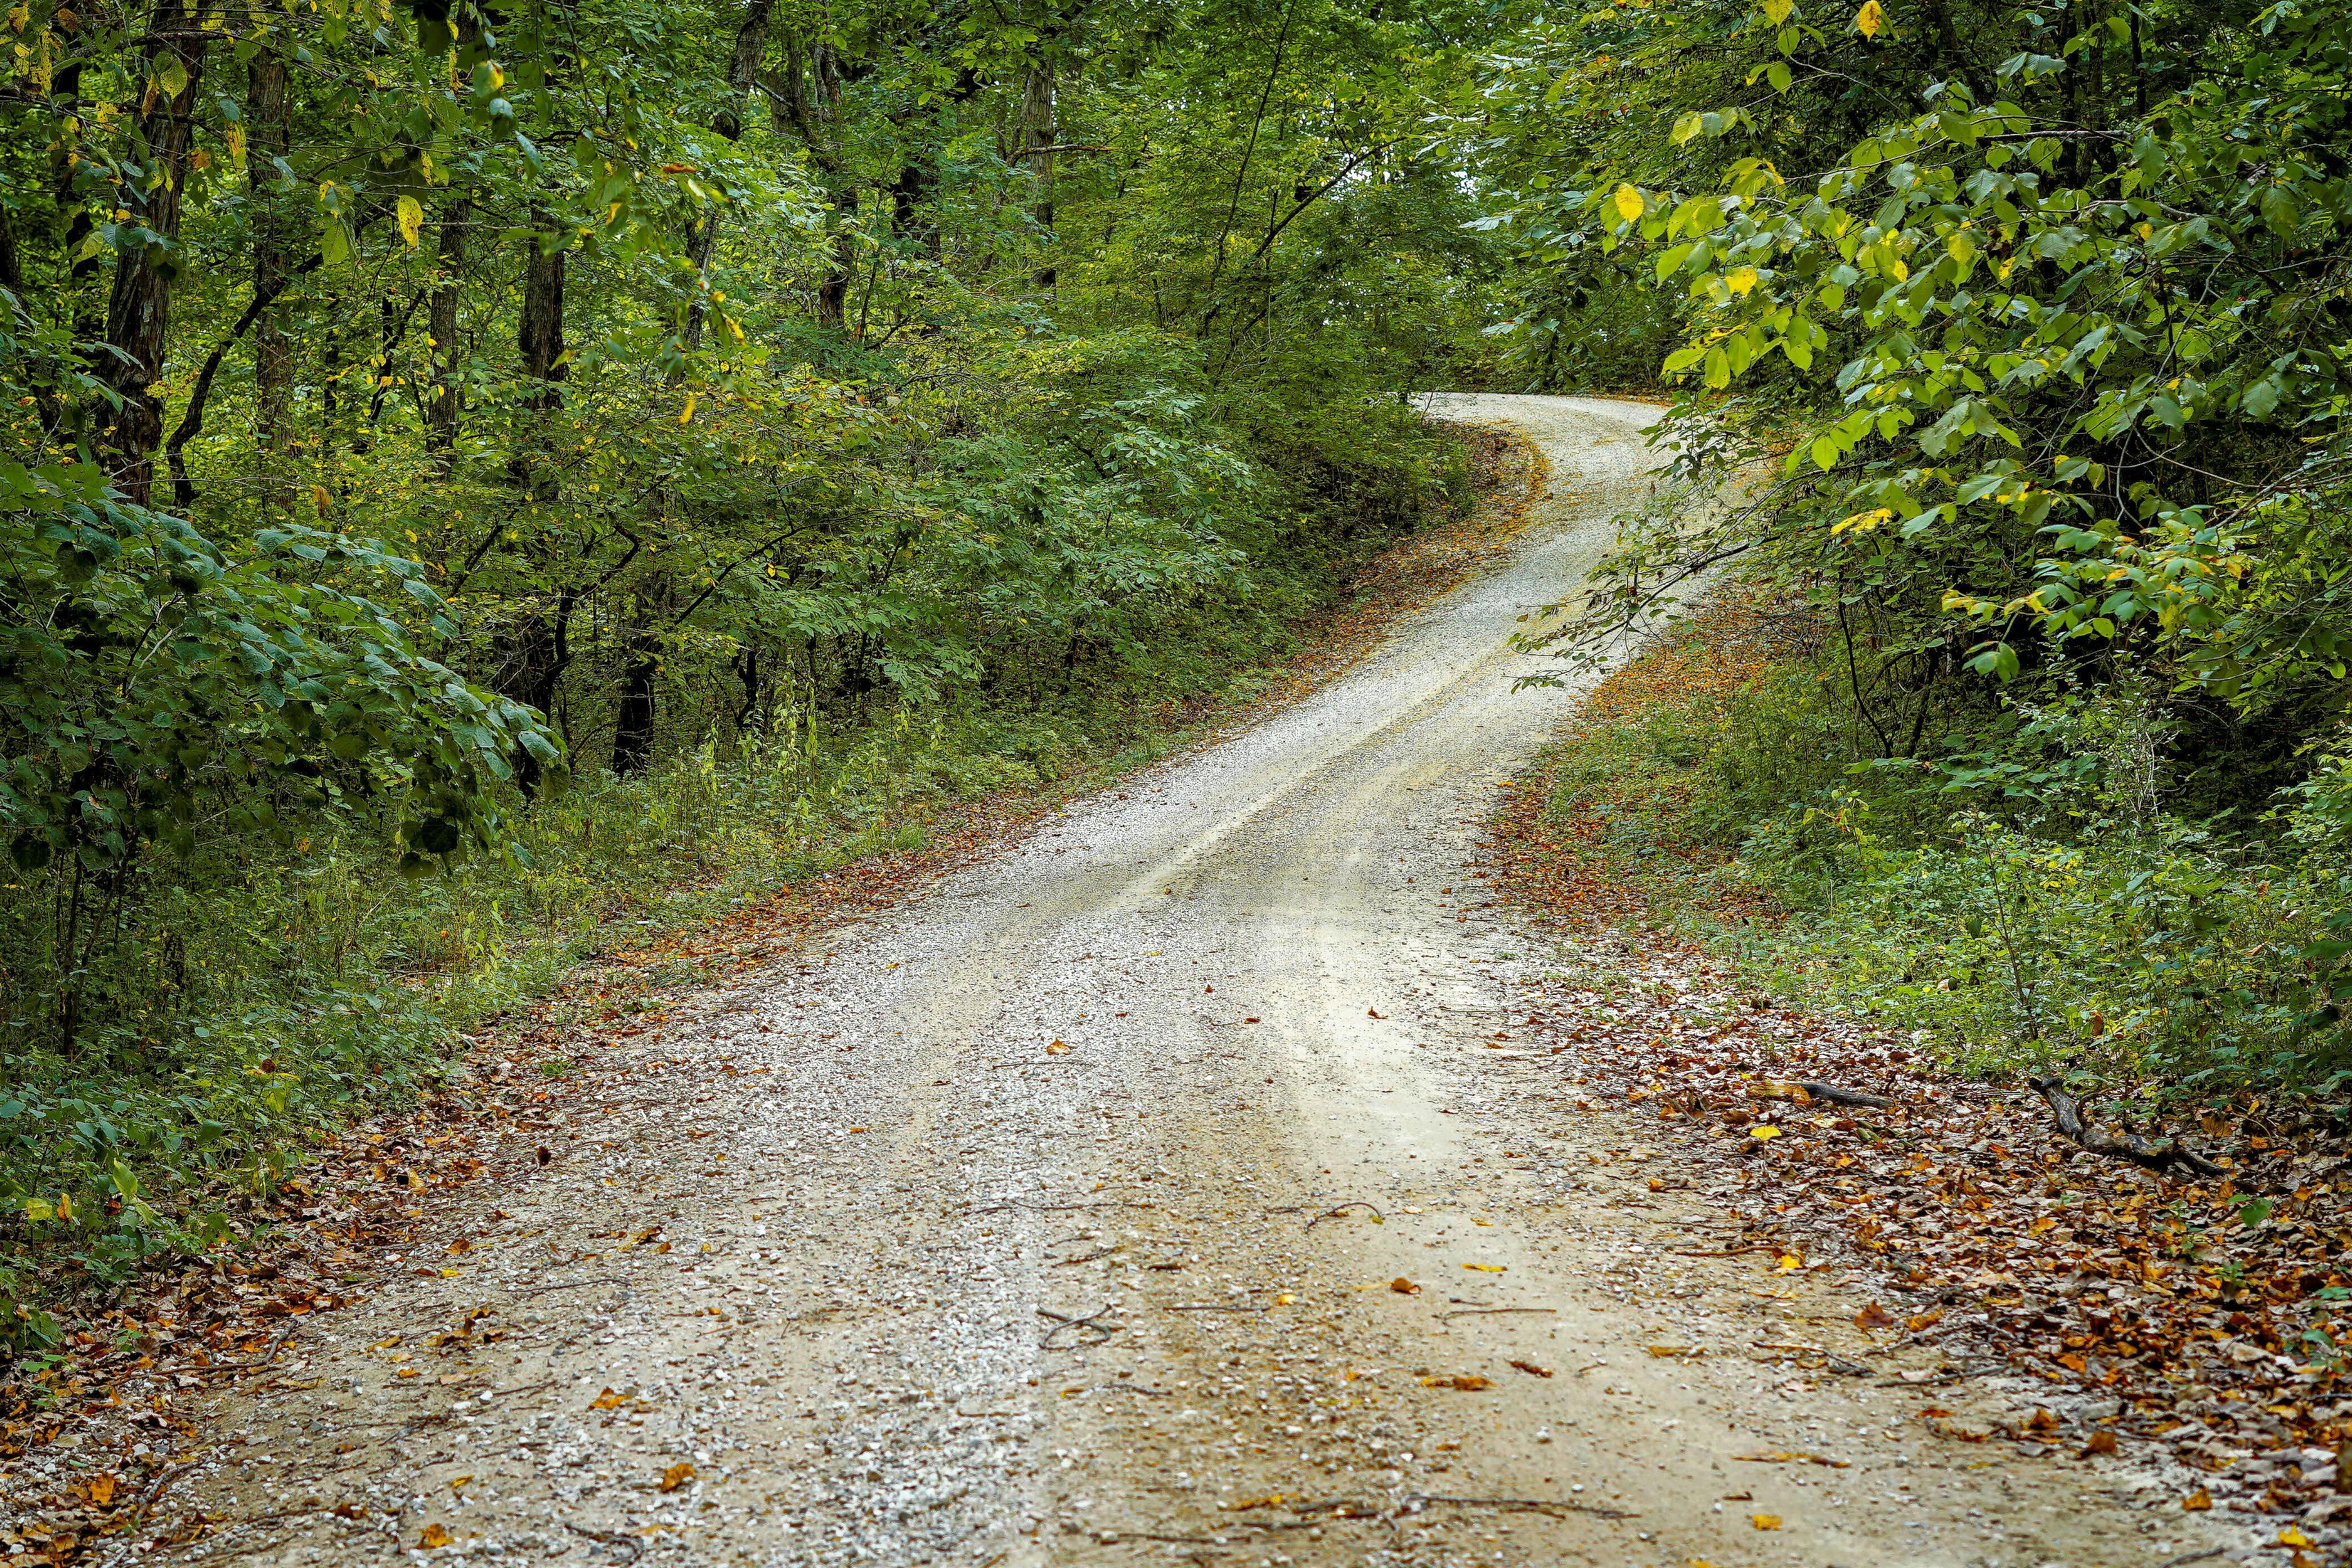 Free stock photo of winding country gravel road tree covered rural